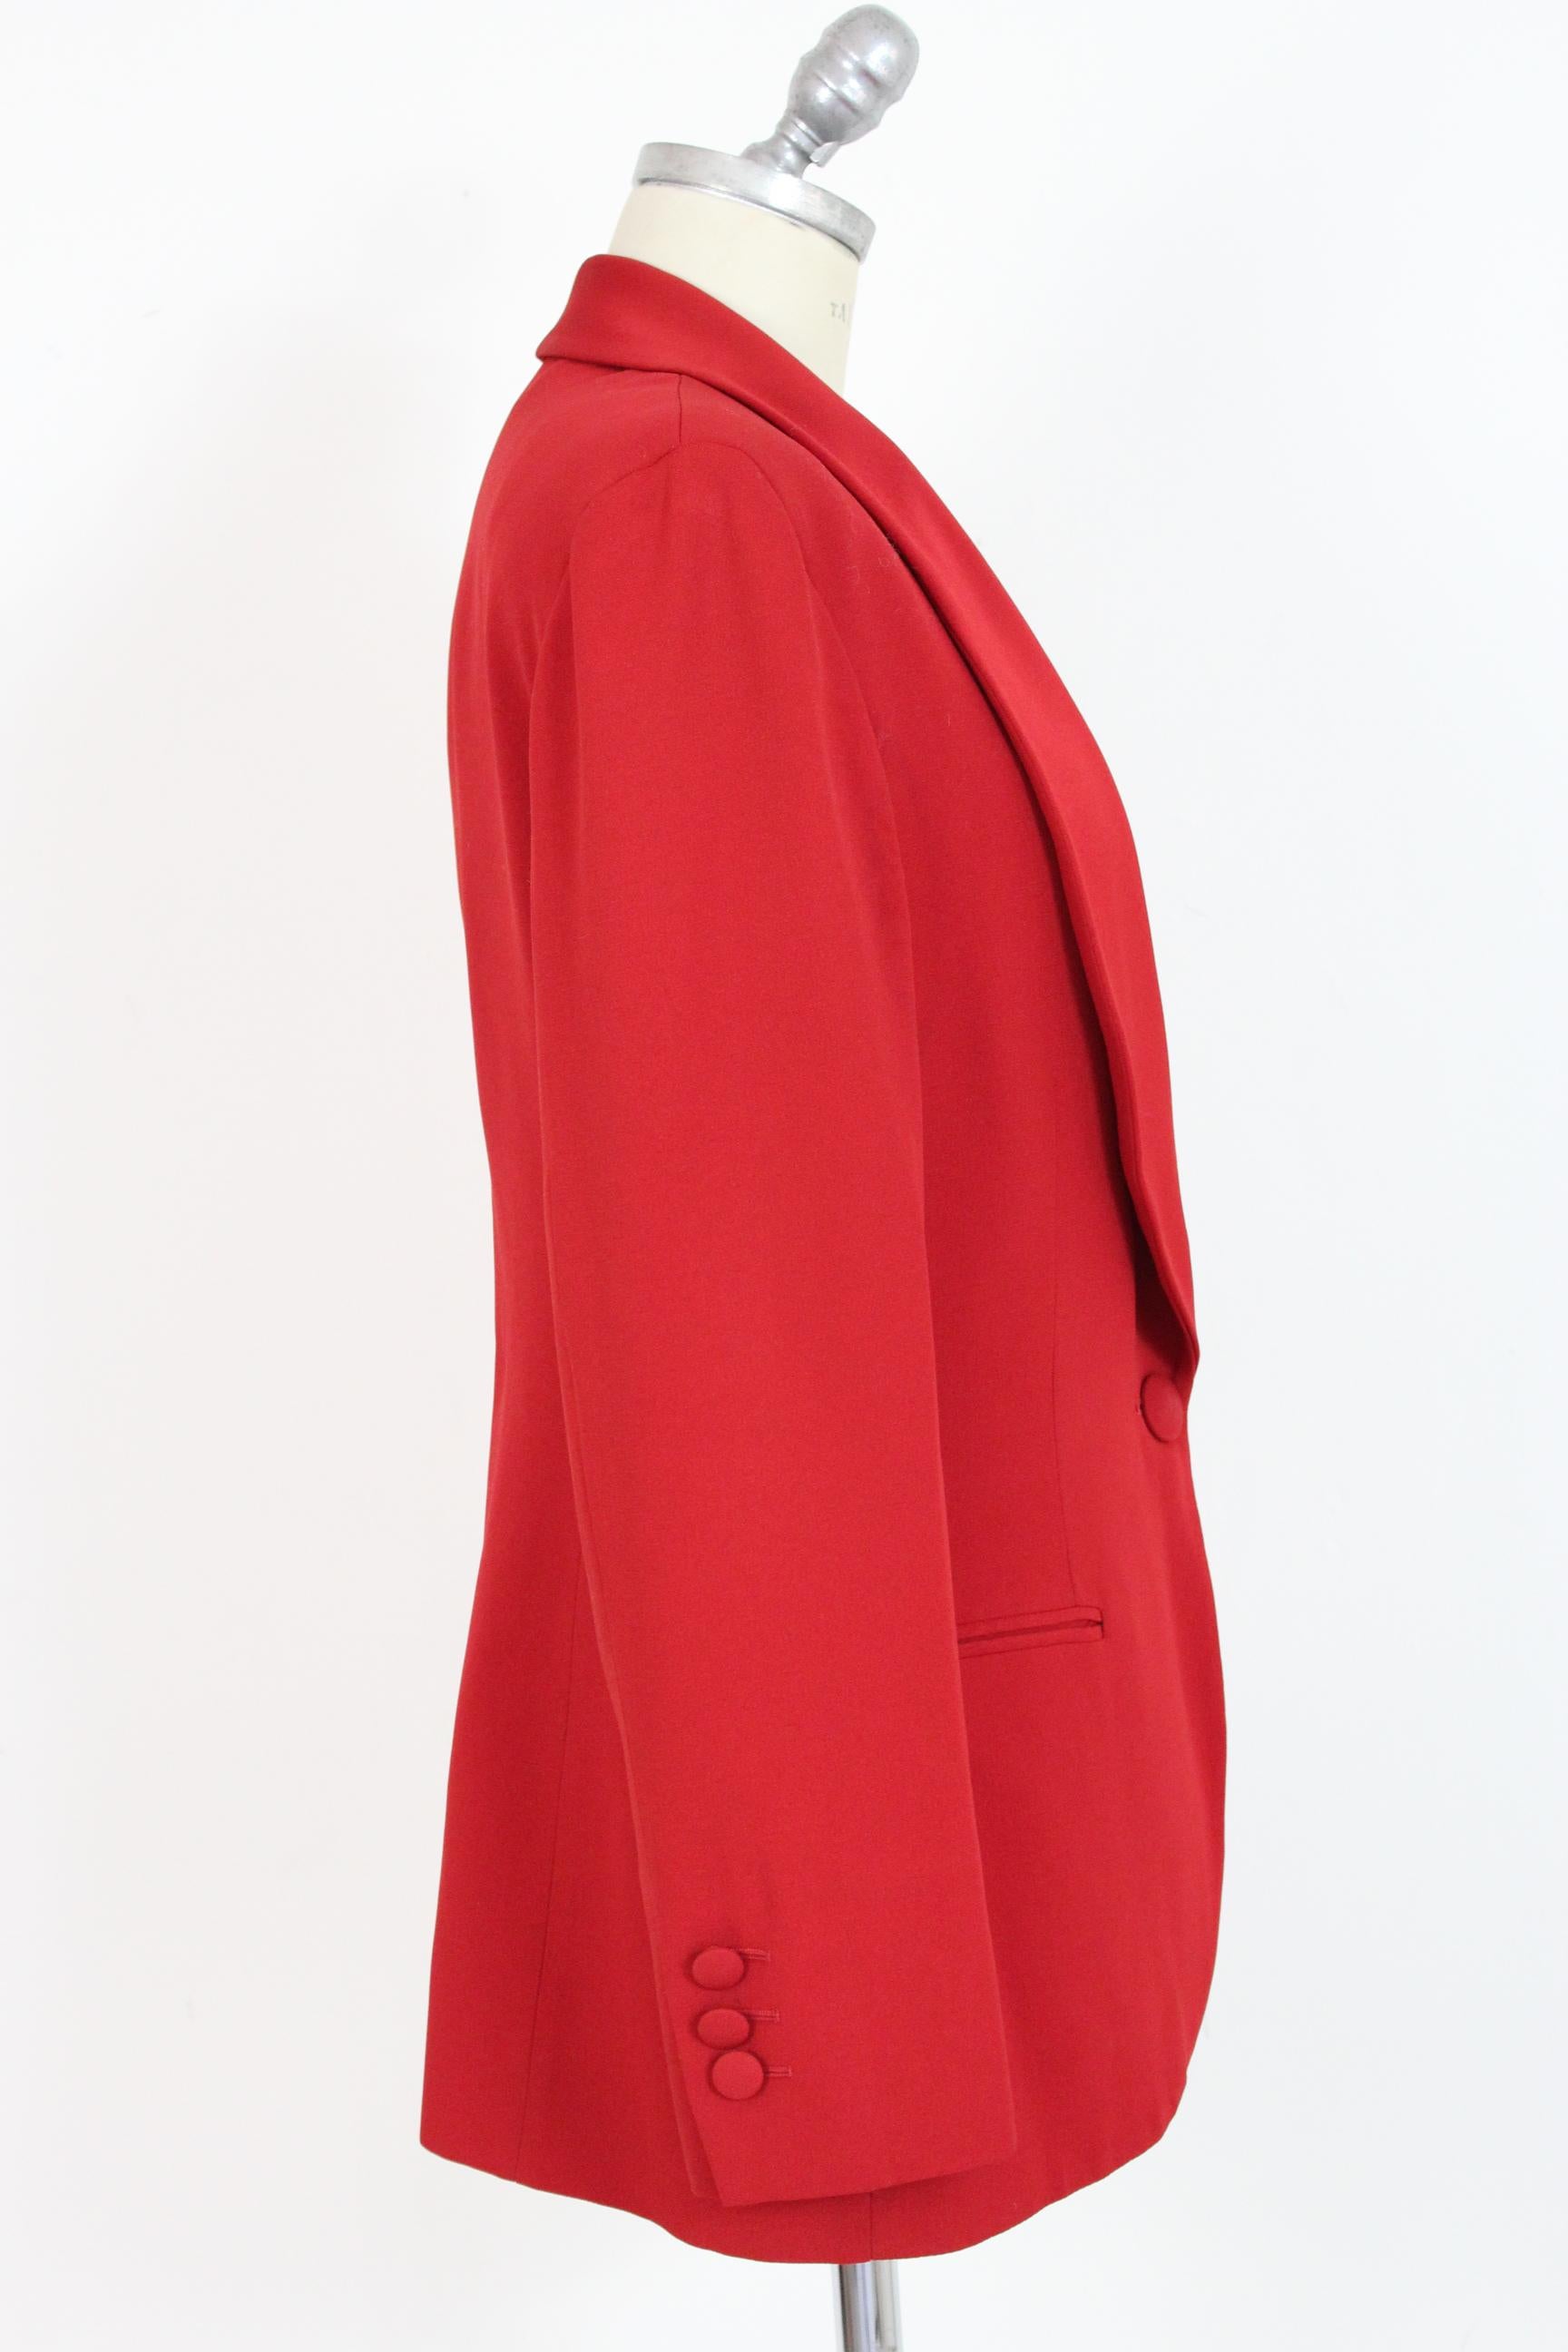 Moschino Cheap And Chic Red Satin Flared Tuxedo Jacket 1990s In Excellent Condition In Brindisi, Bt